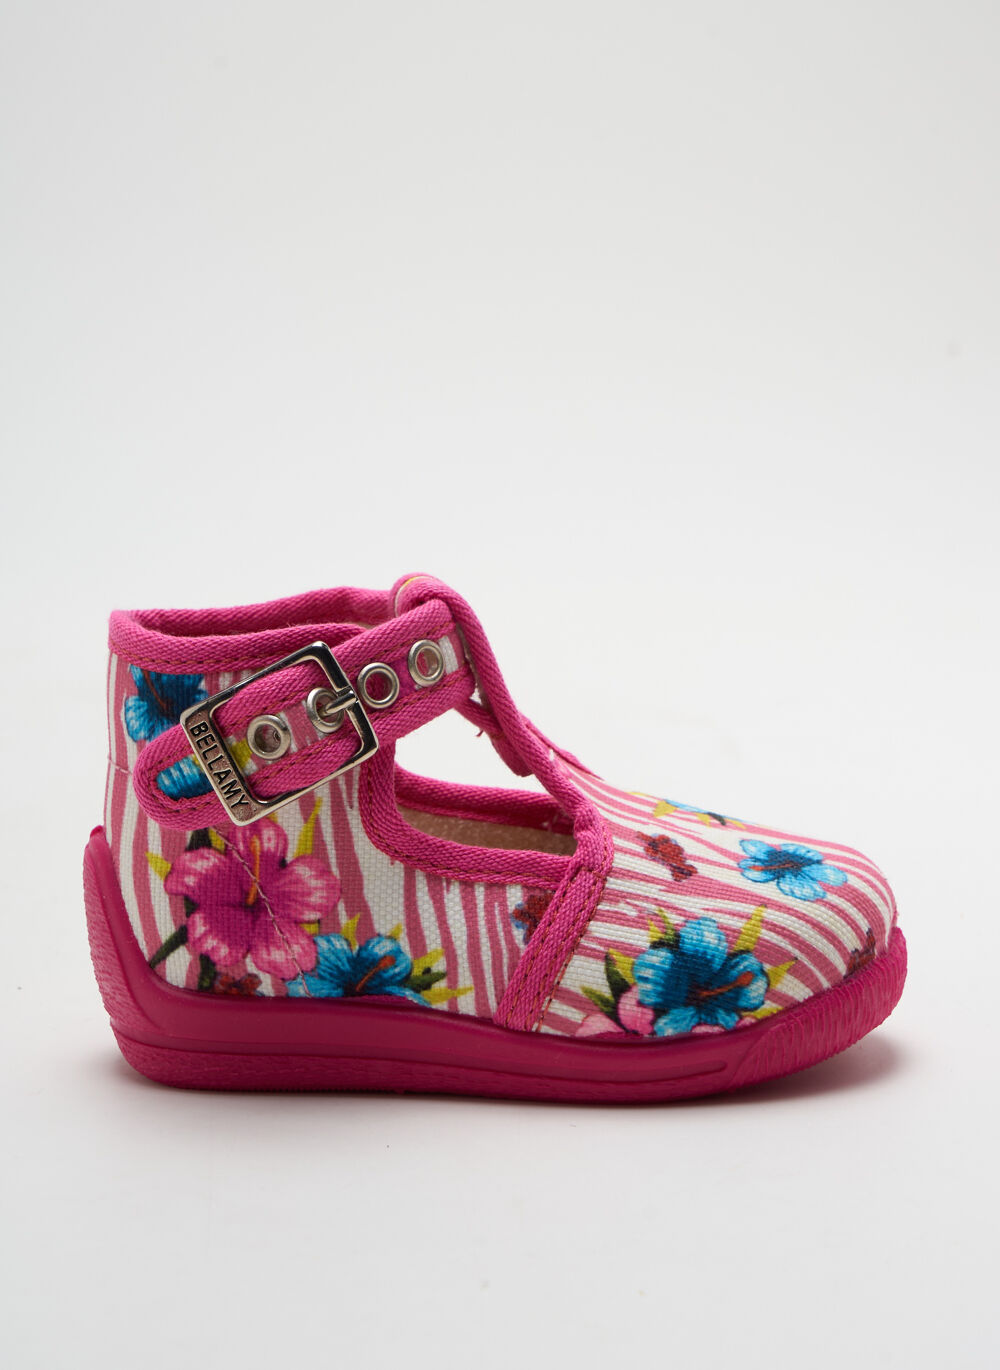 Chaussons/Pantoufles fille Bellamy rose taille : 20 Vtements